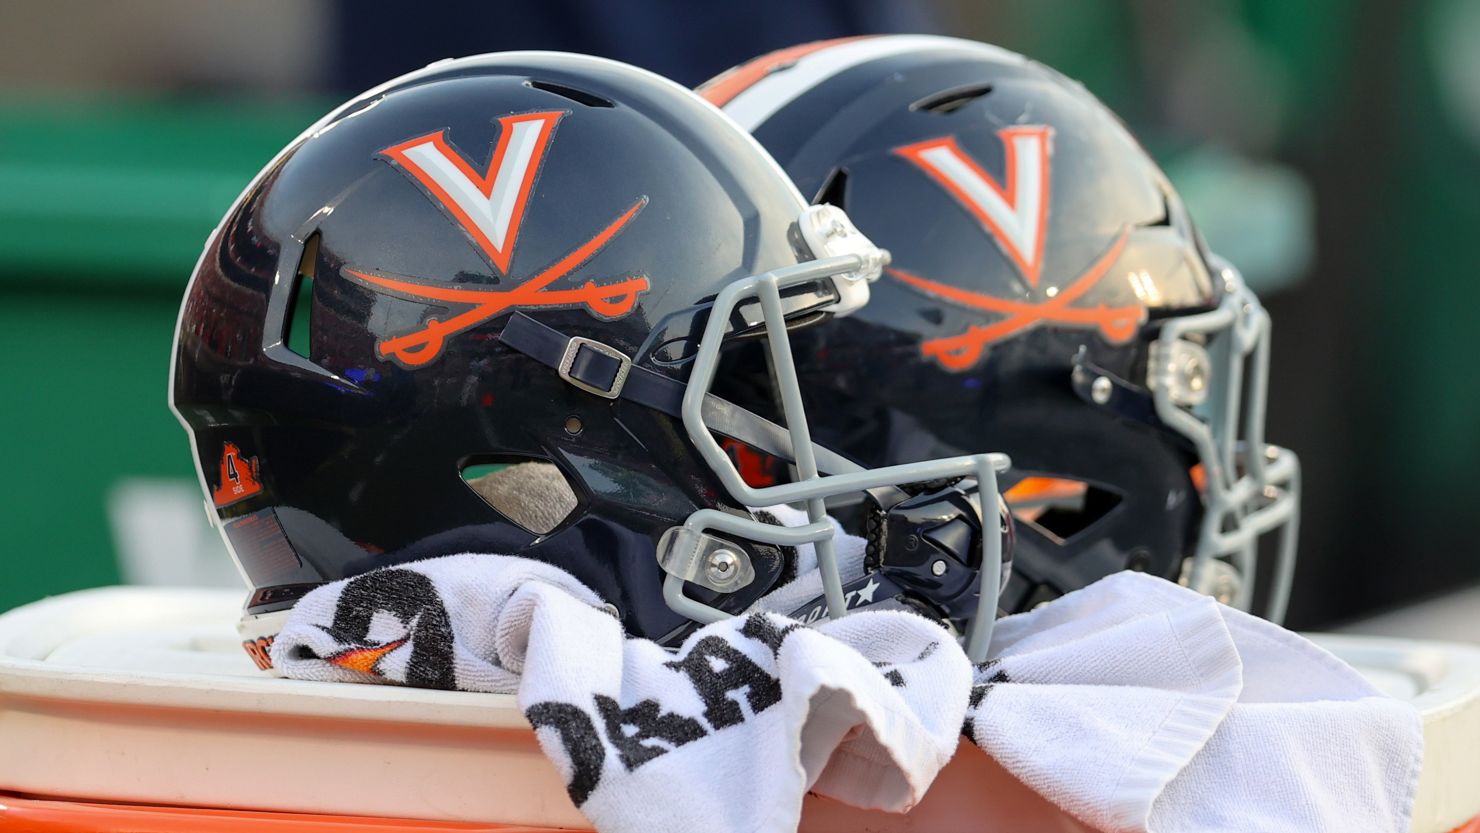 A rise in Covid-19 cases within the University of Virginia football team led to the cancellation of the Fenway Bowl in Boston.